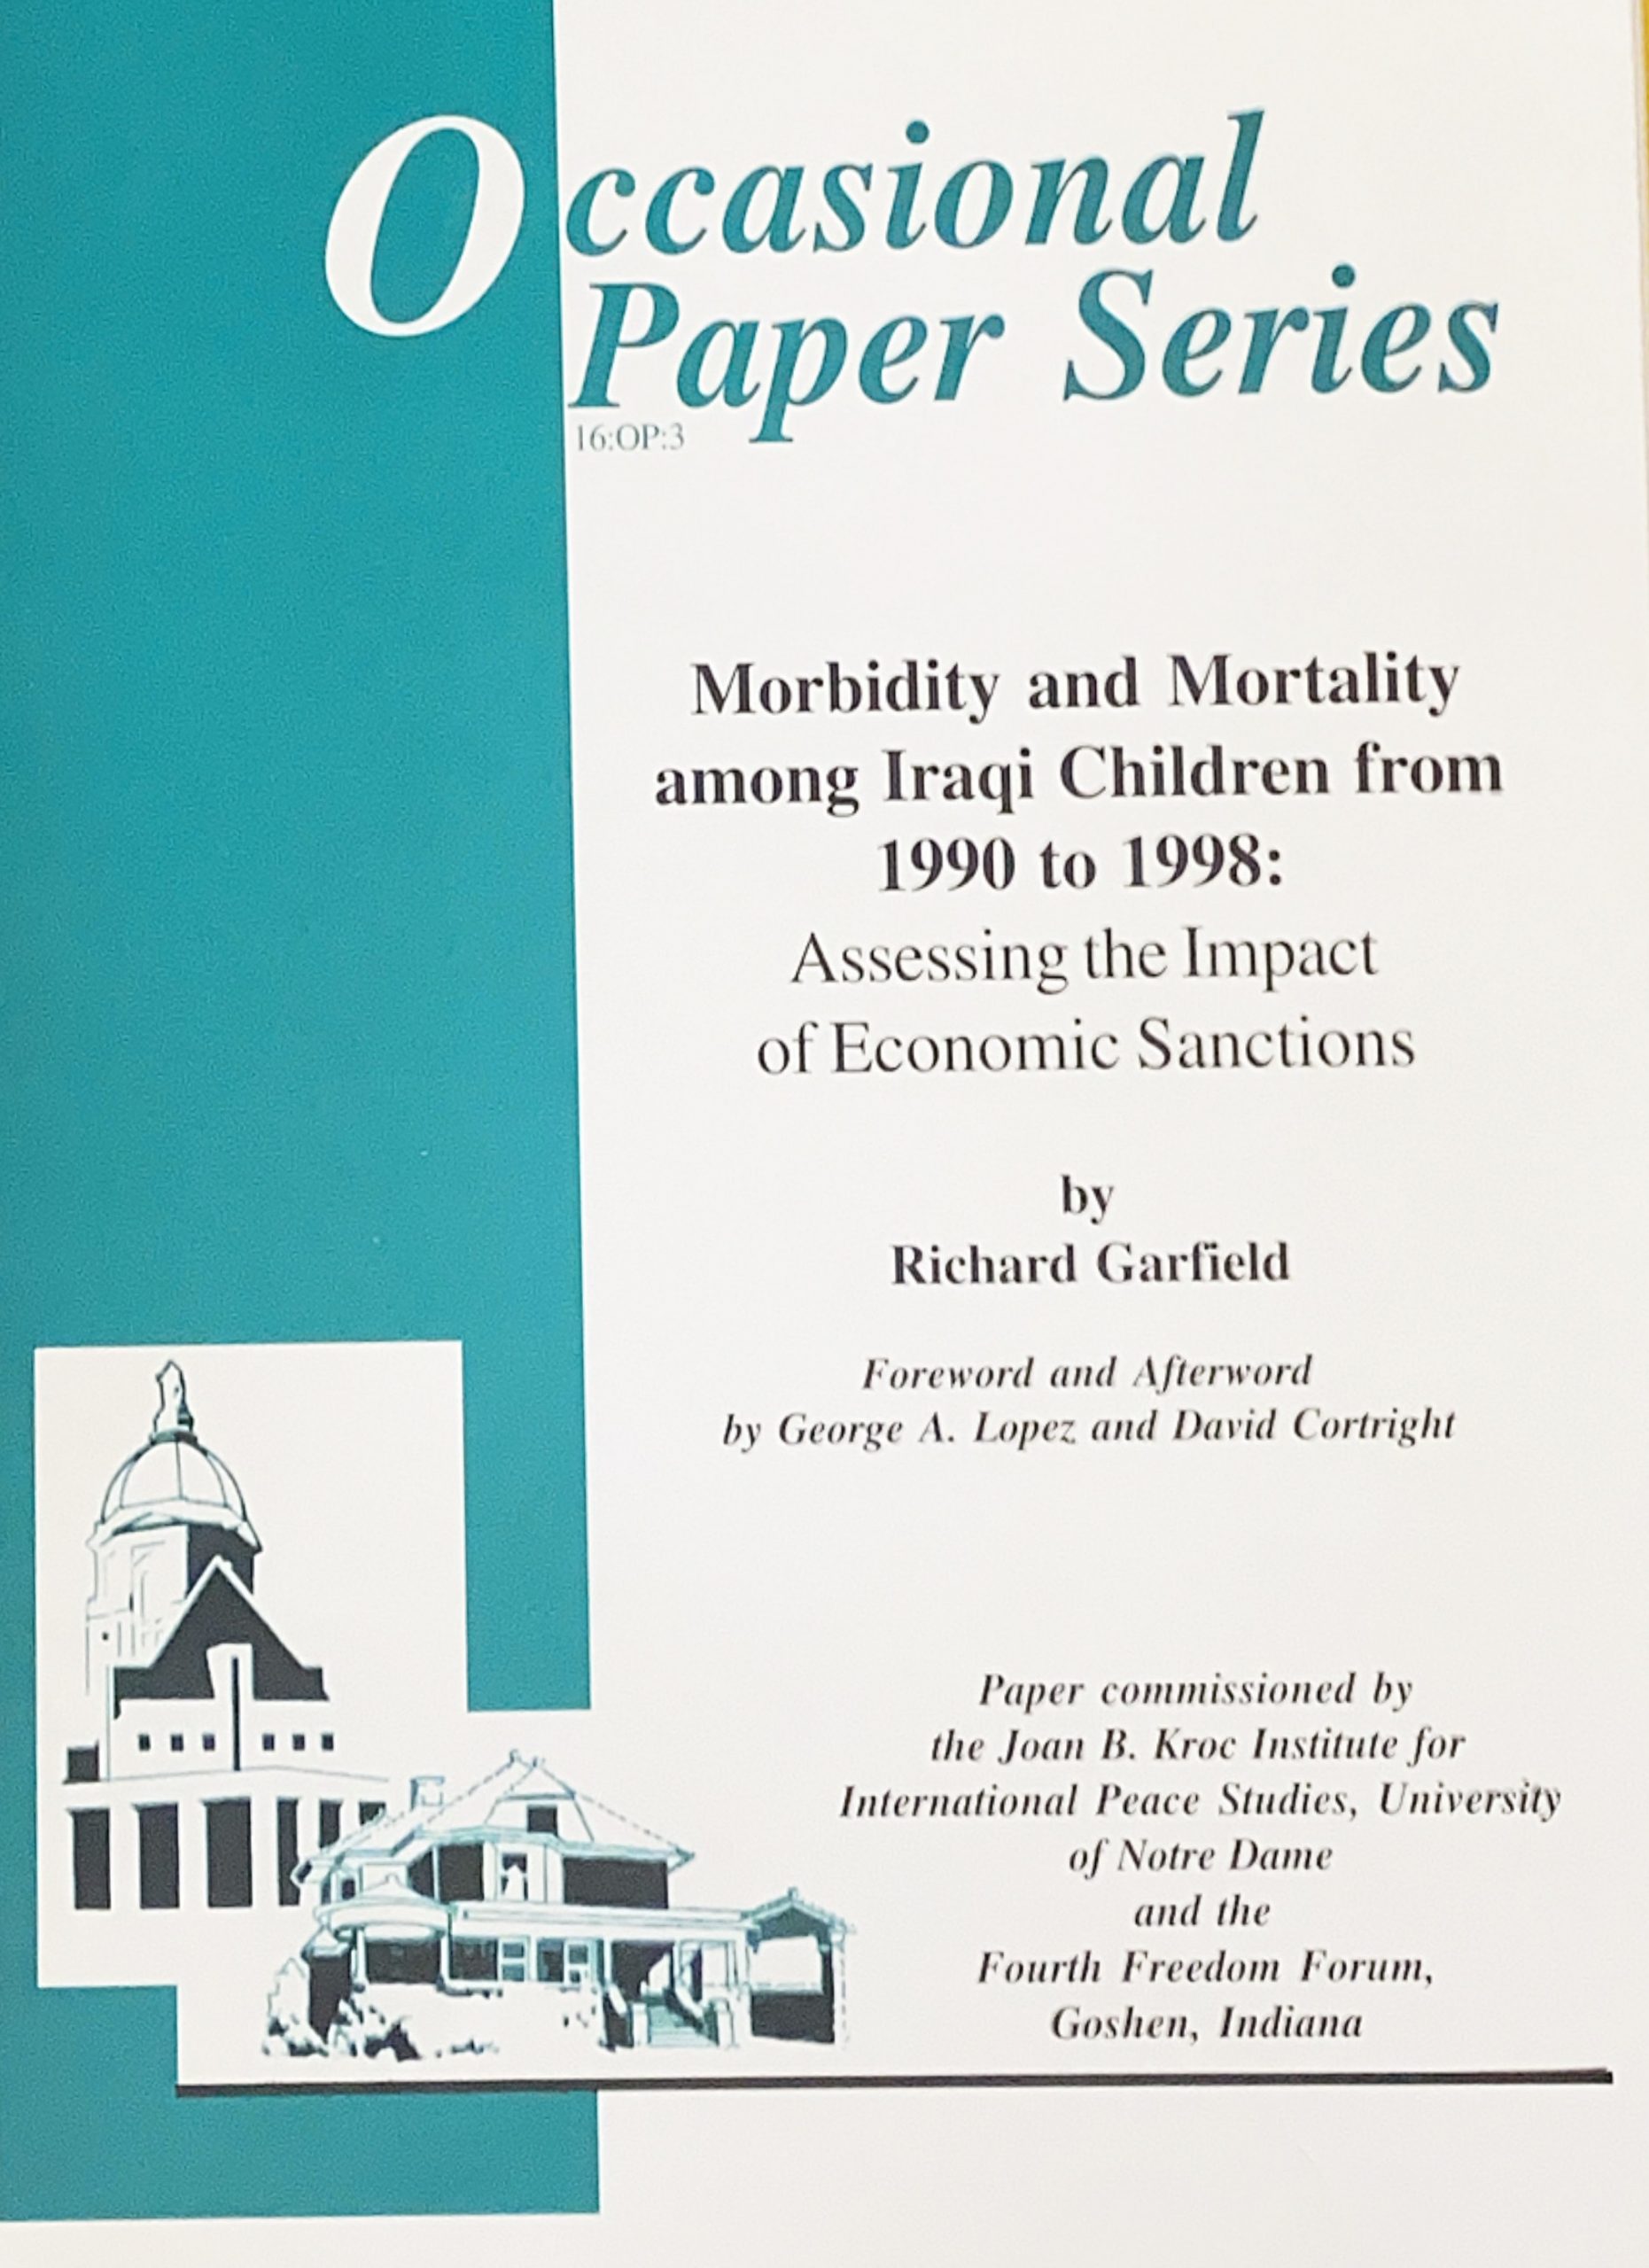 Morbidity and Mortality among Iraqi Children from 1990 to 1998: Assessing the Impact of Economic Sanctions